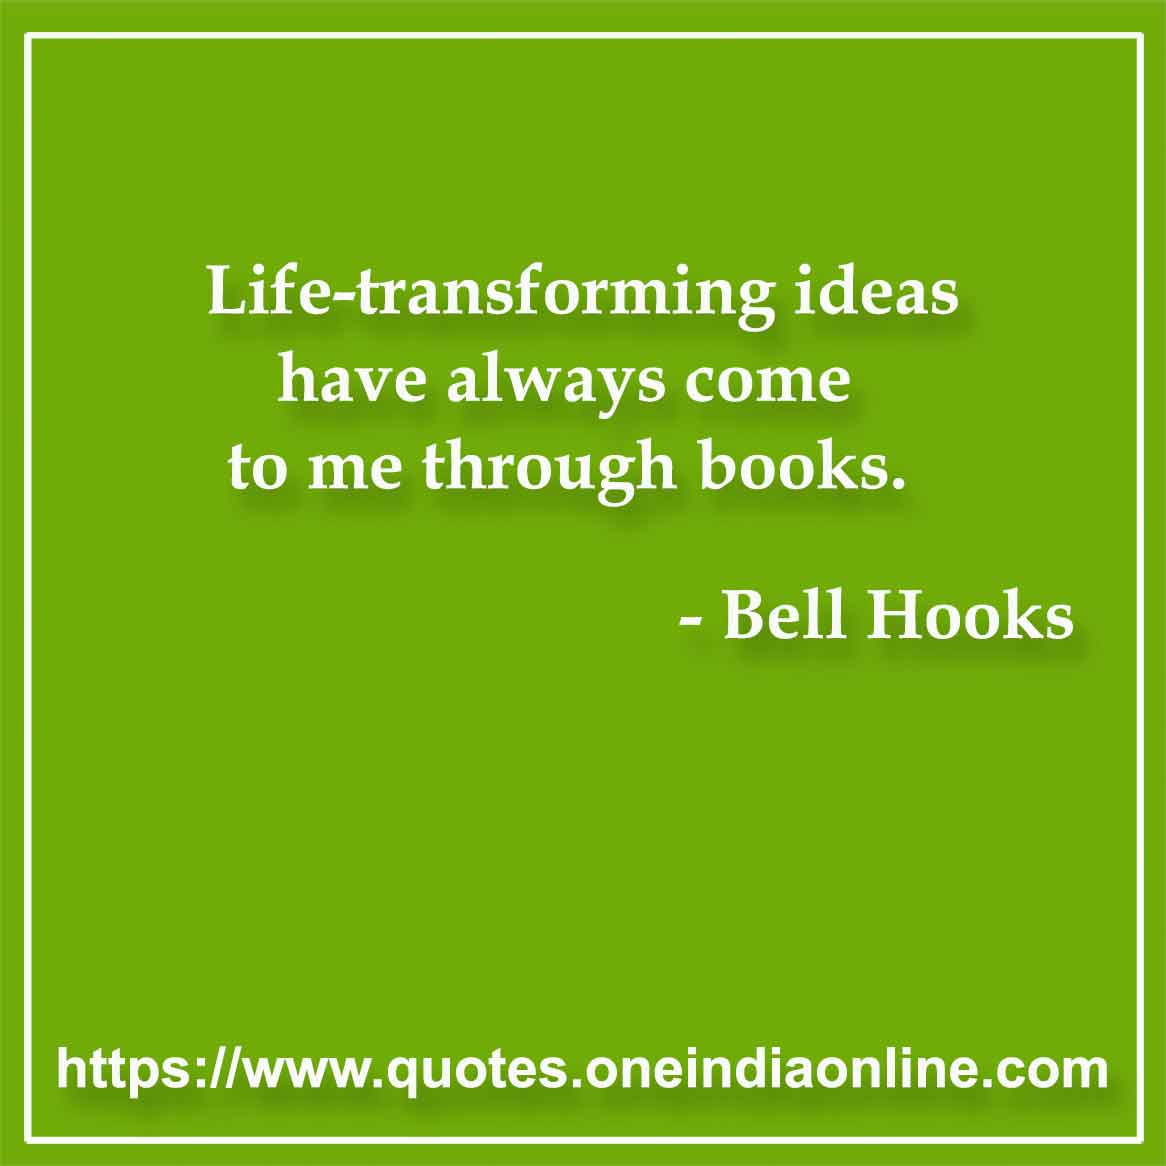 Life-transforming ideas have always come to me through books.

- Book Quote by Bell Hooks